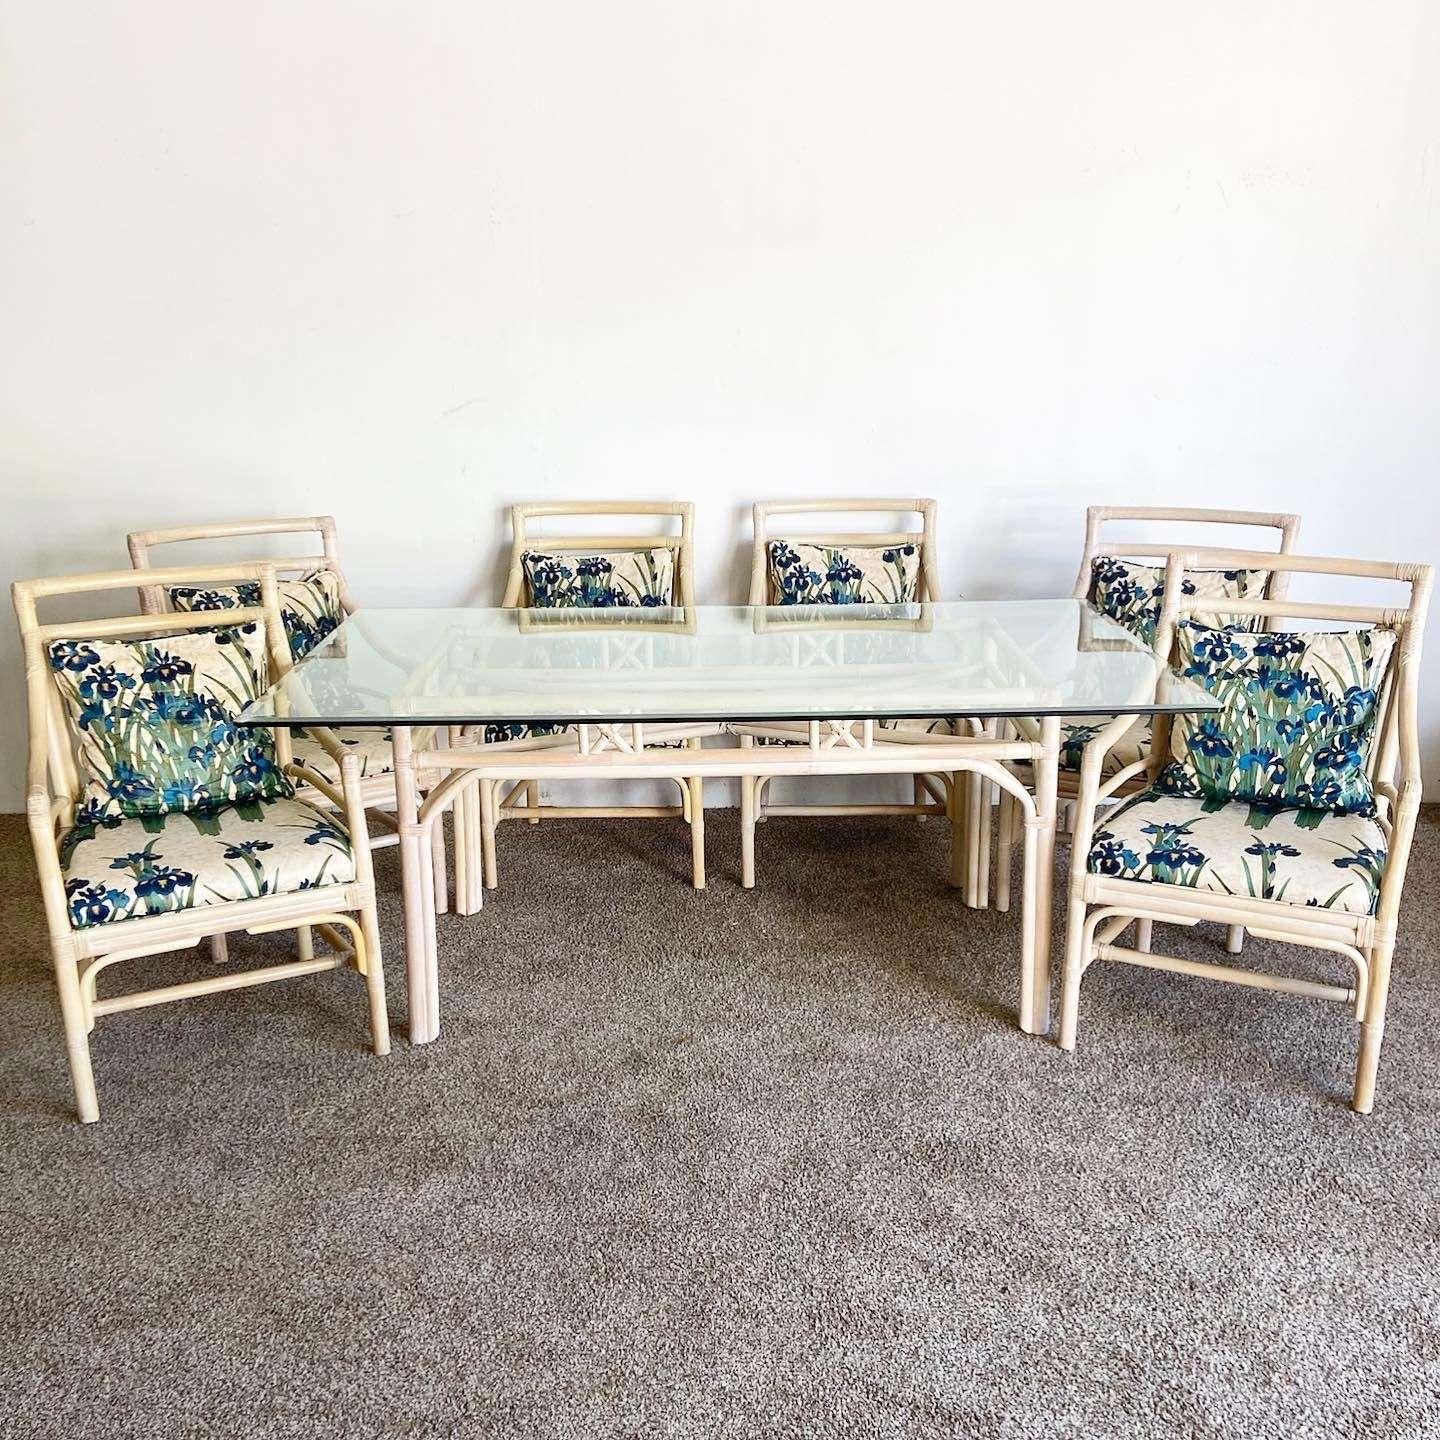 Bohemian McGuire Target Style Rattan Bamboo Dining Side Armchairs - Set of 6 In Good Condition For Sale In Delray Beach, FL